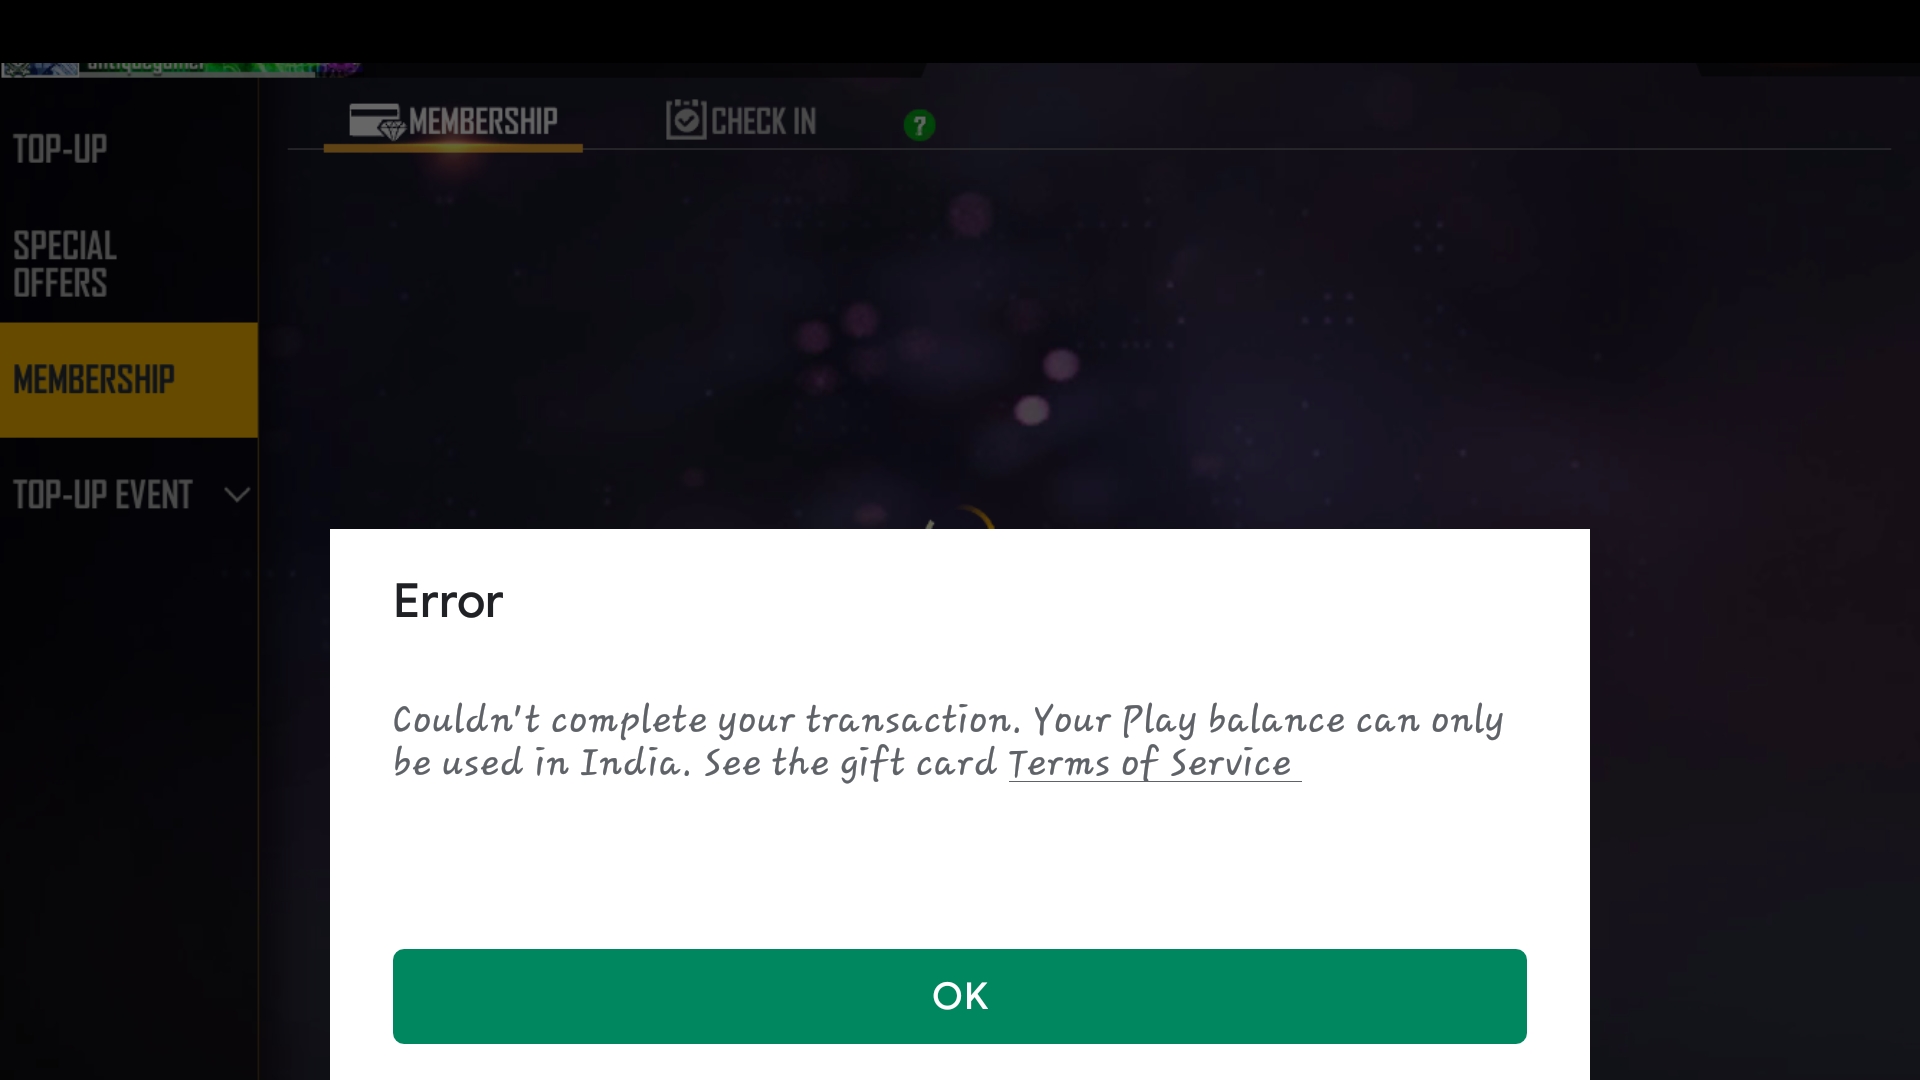 Free fire top up err transaction cannot completed - Google Play Community